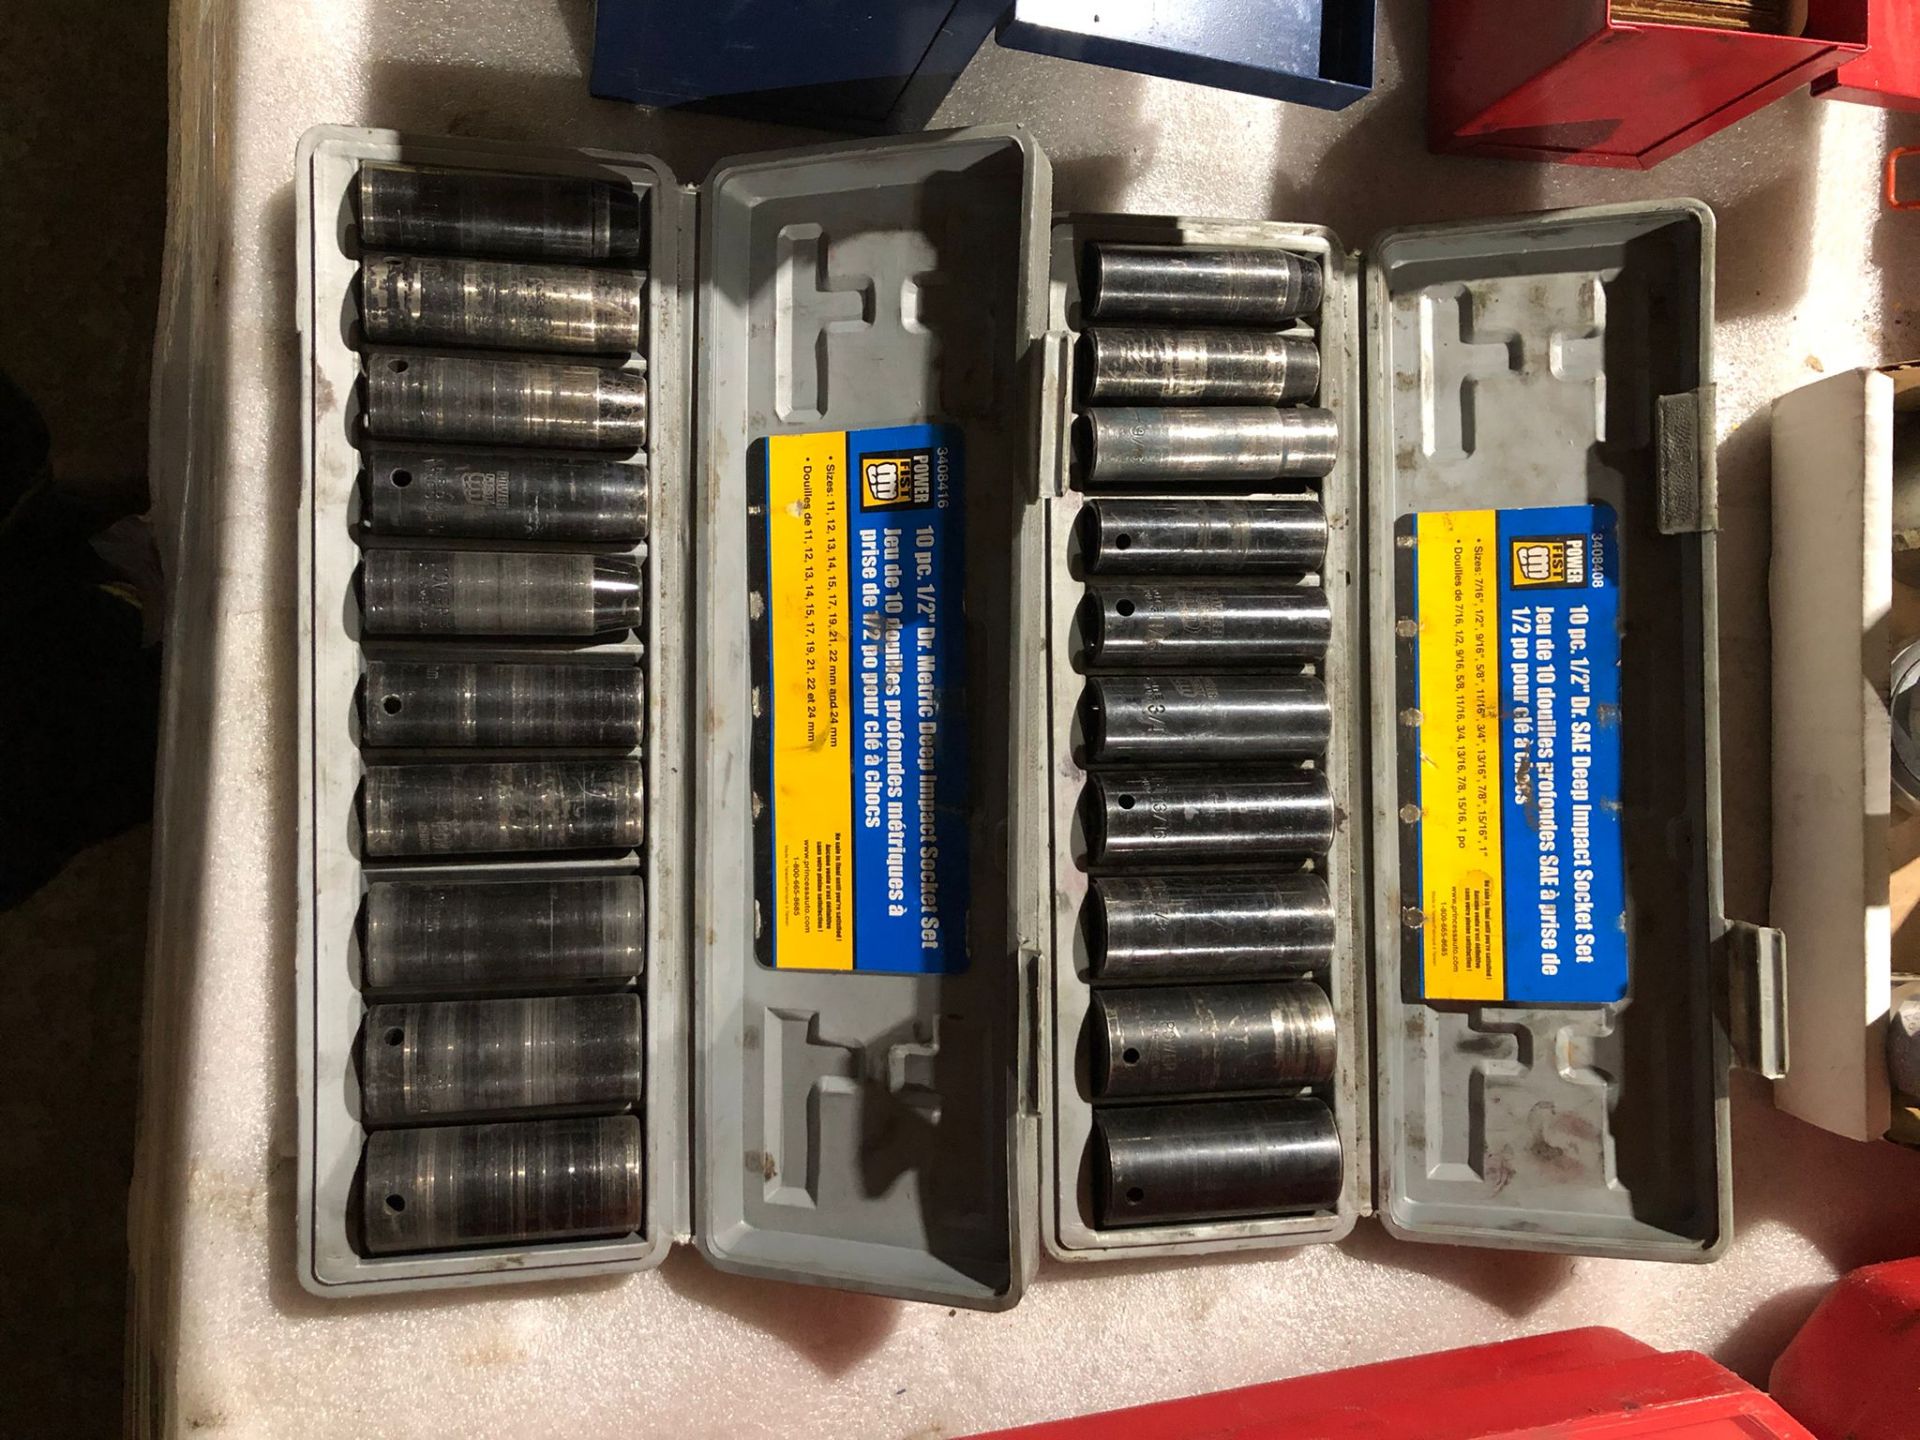 Lot of 2 (2 sets) of Deep Impact Socket Extension Sets Metric and Inch